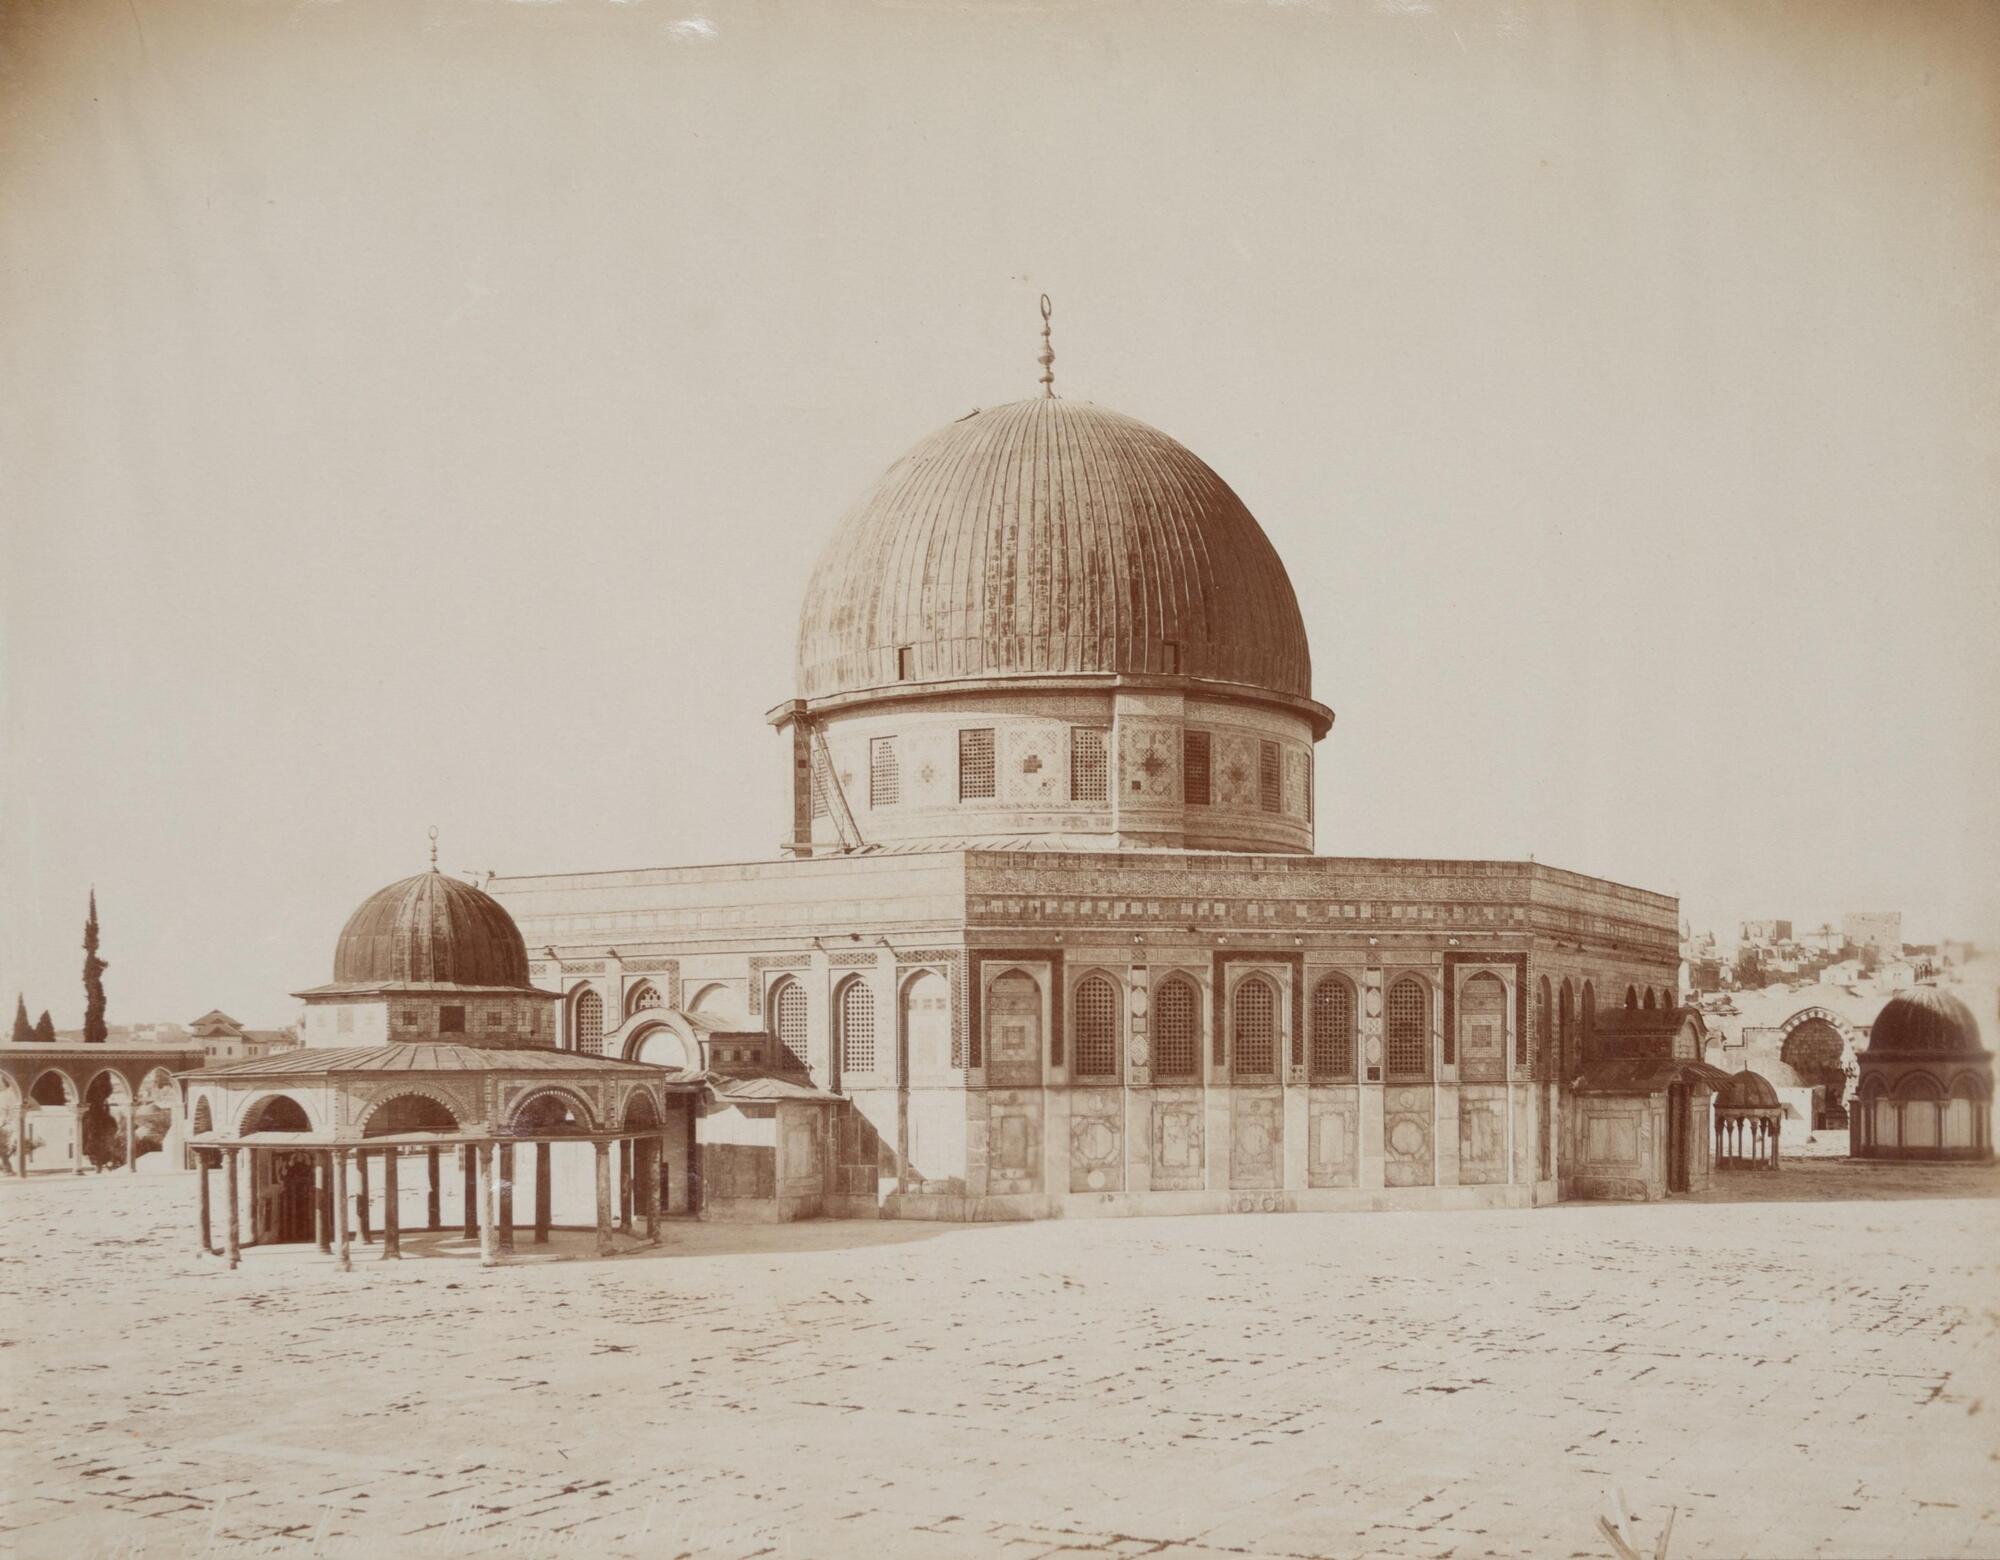 View of an octagonal building with central cupola surrounded by smaller domed structures.